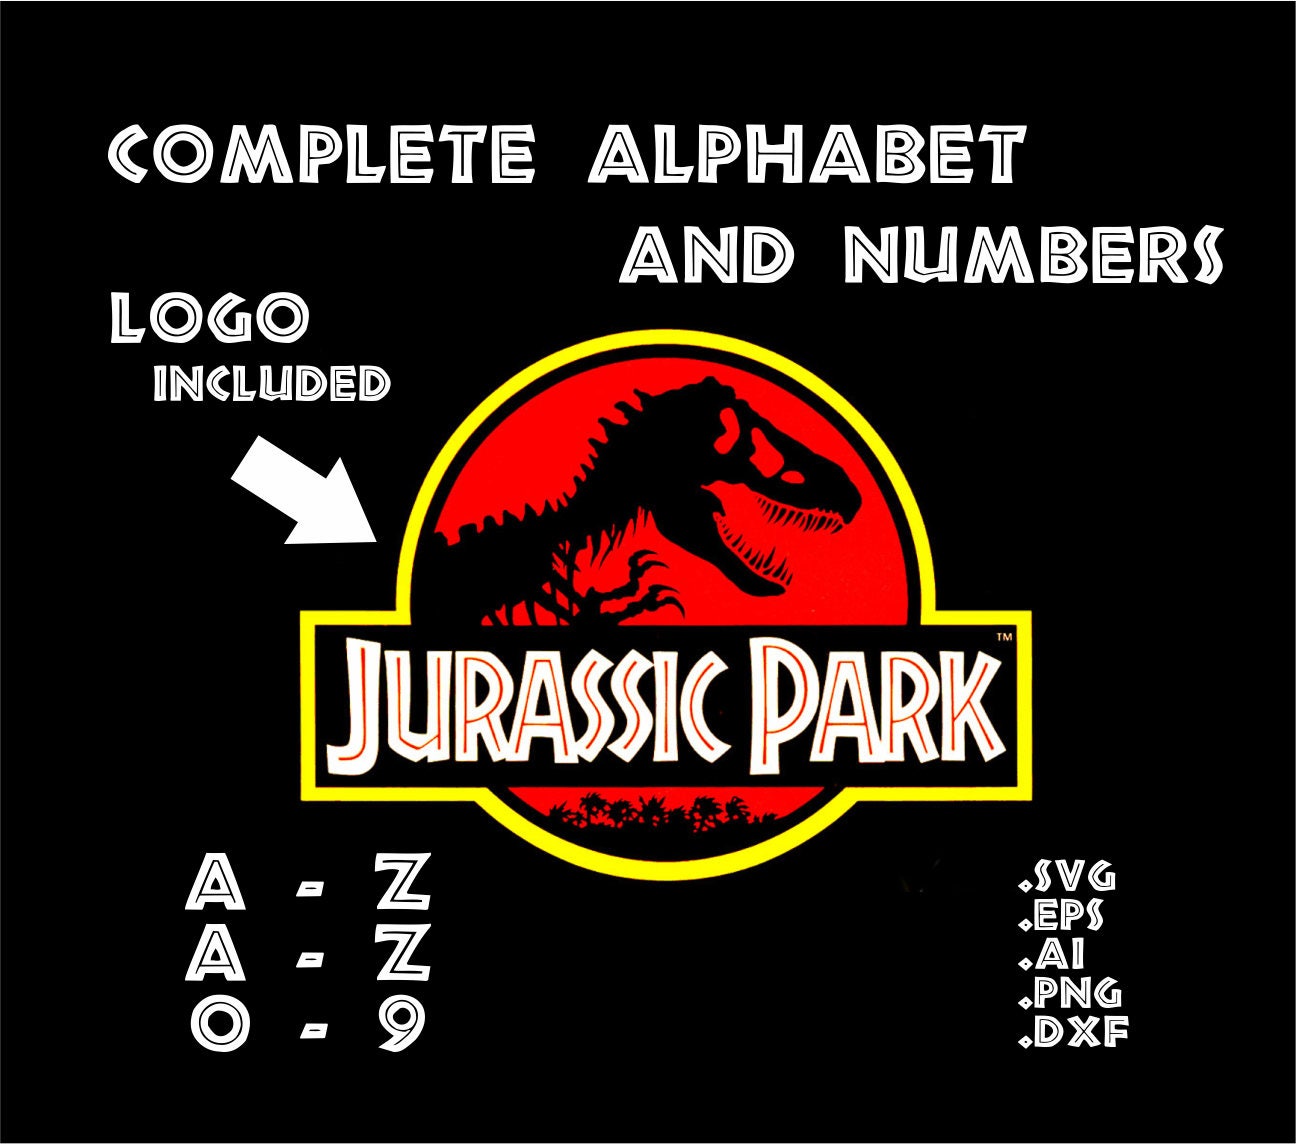 Download Jurassic Park complete alphabet and numbers in svg eps ai